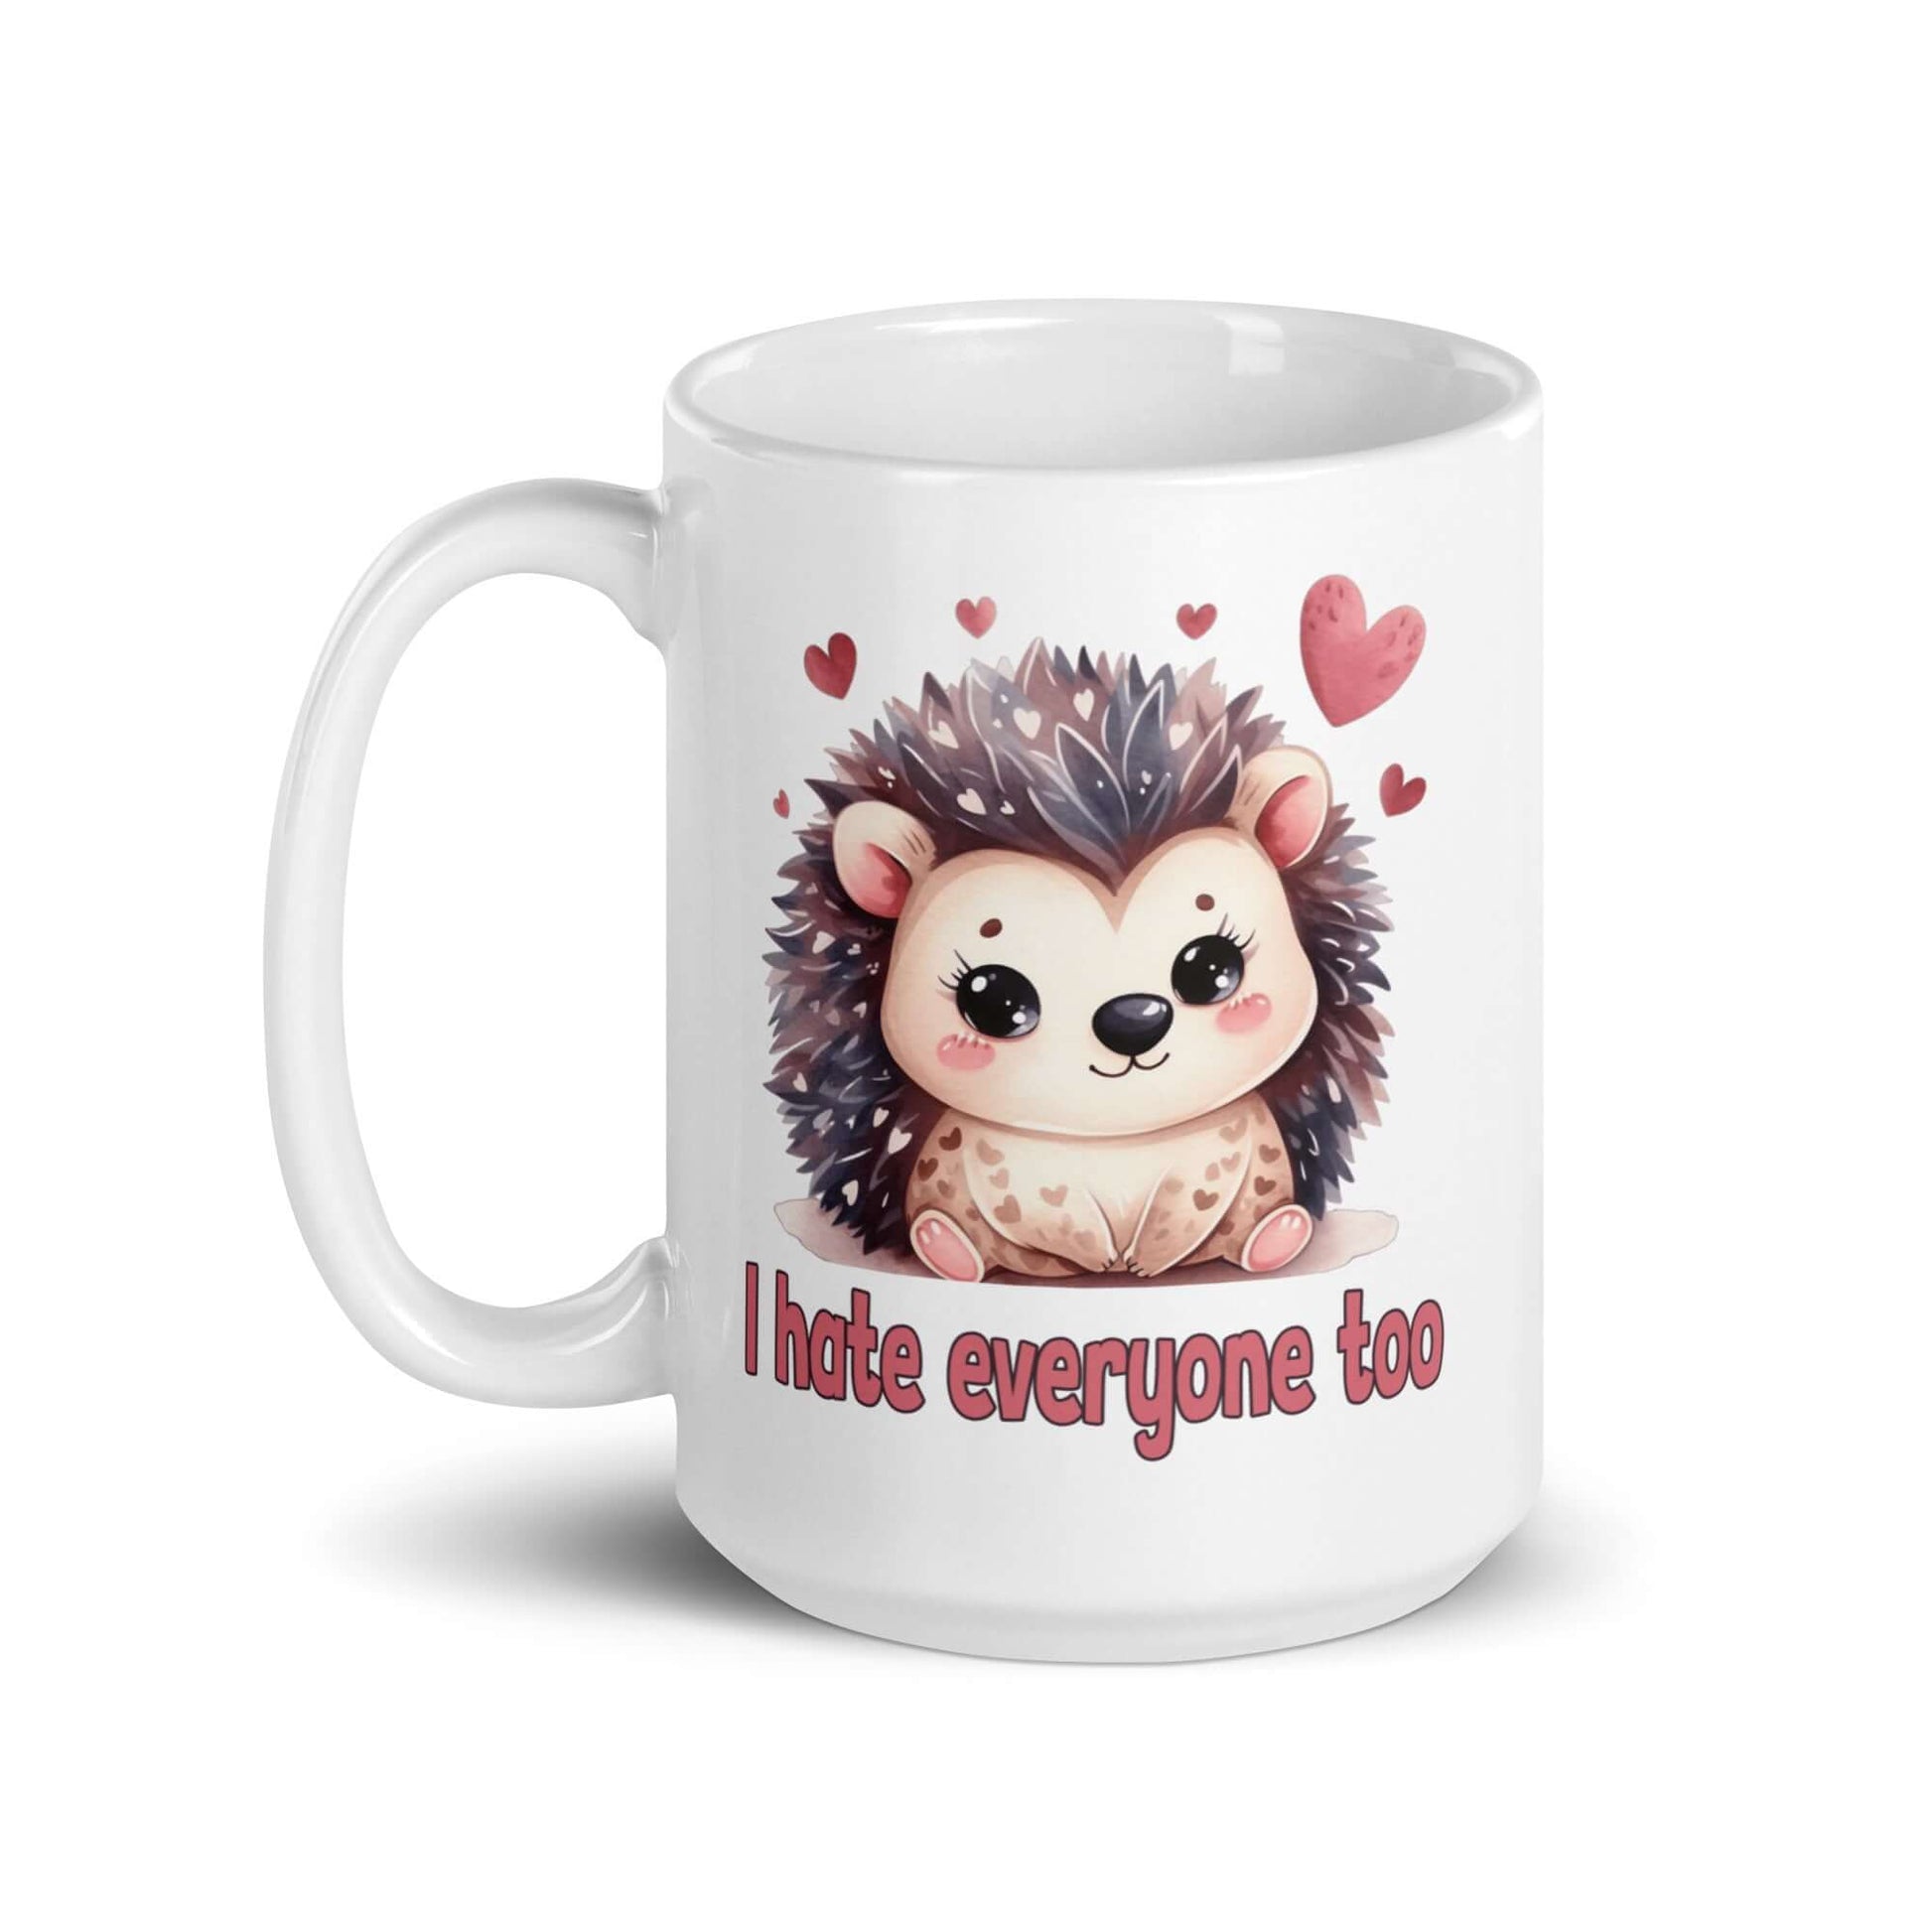 White ceramic mug with cute hedgehog graphic and the words I hate everyone too printed on both sides of the mug.